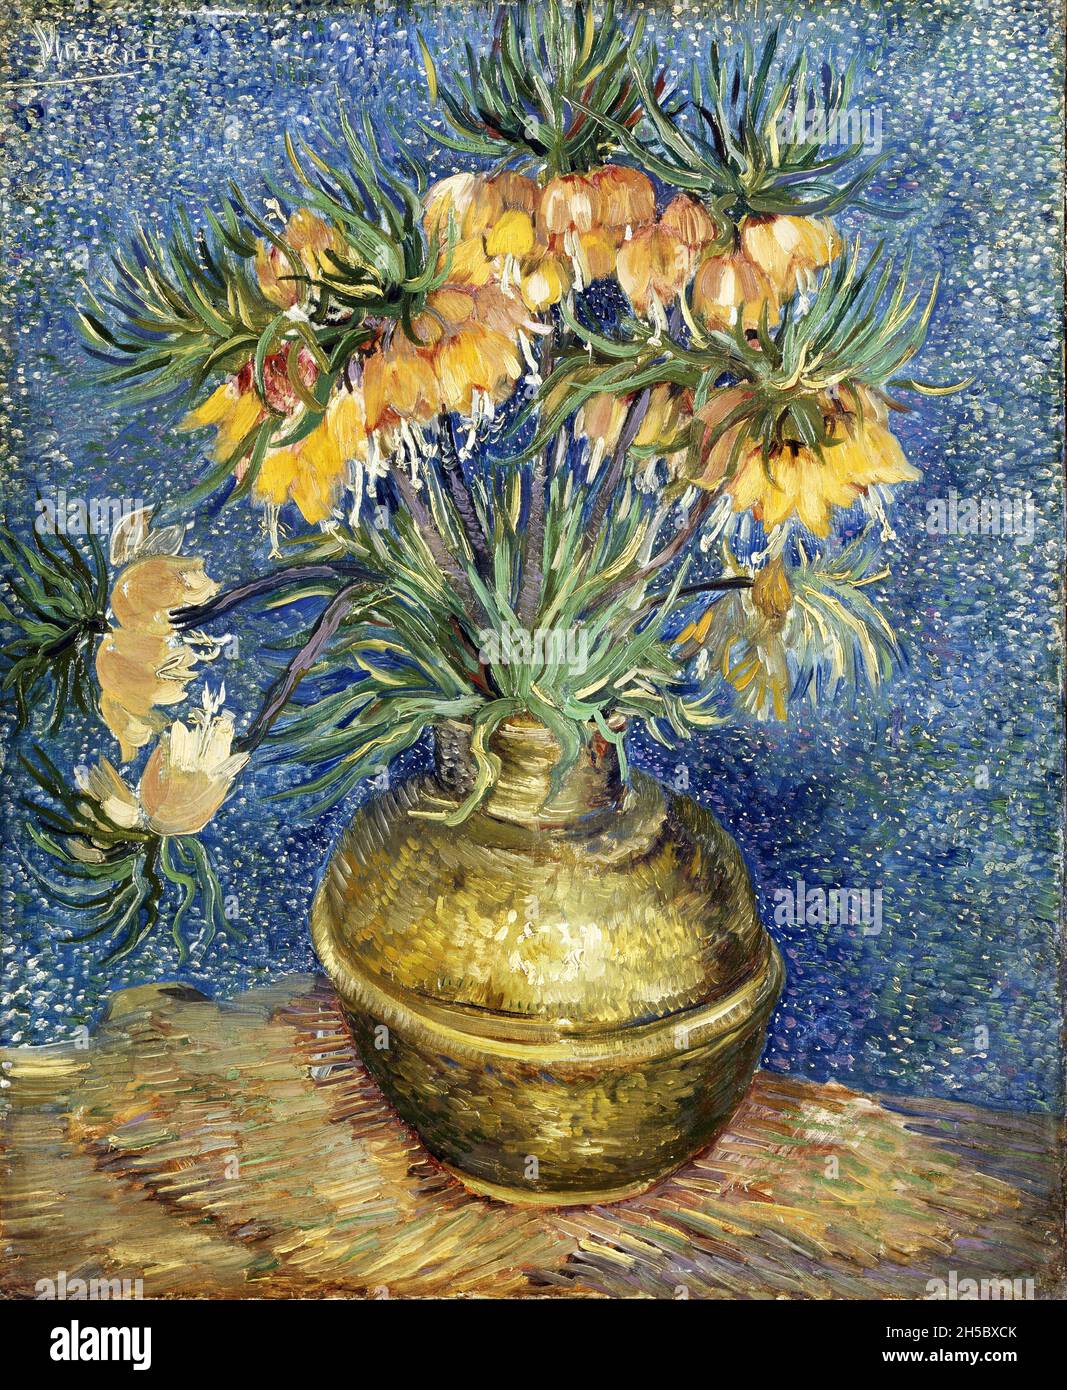 Imperial Fritillaries in a Copper Vase by Vincent van Gogh (1853-1890), oil on canvas, 1887 Stock Photo